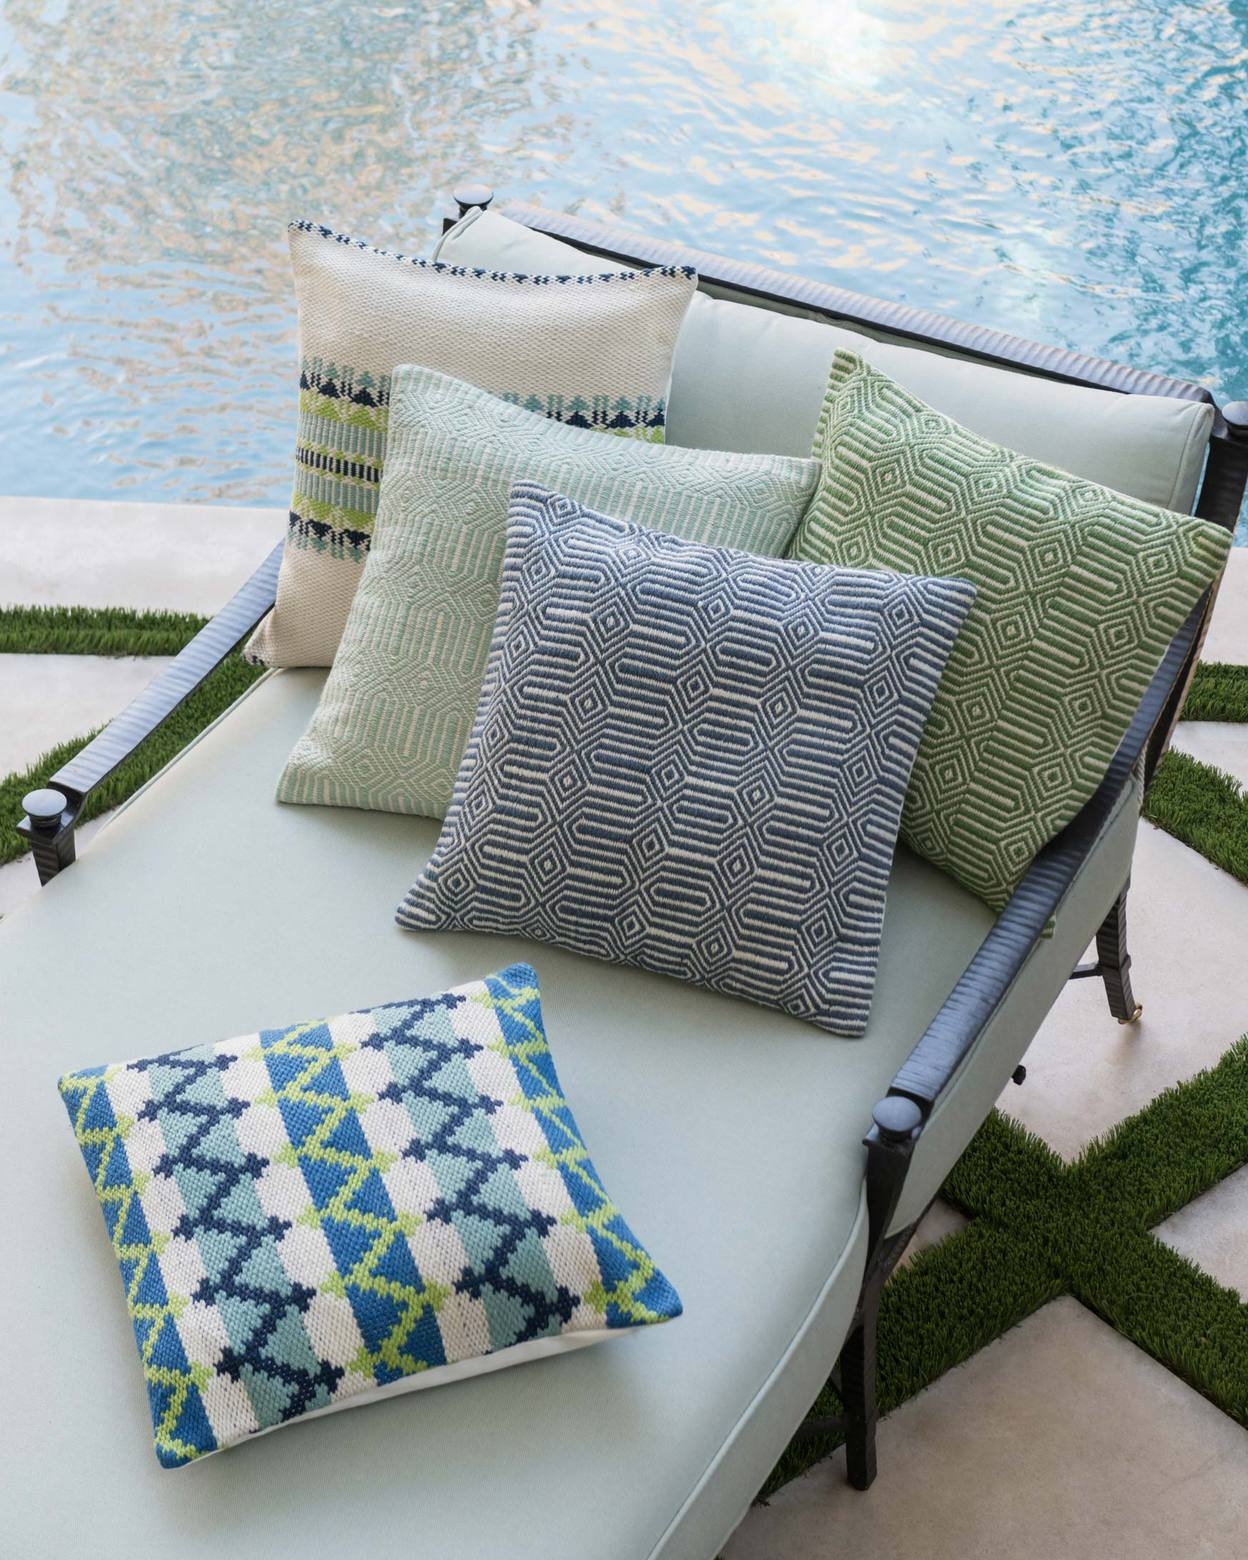 Indoor/Outdoor Geometric Throw Pillow Cover, Blue & Ivory, 22" x 22" - Image 1